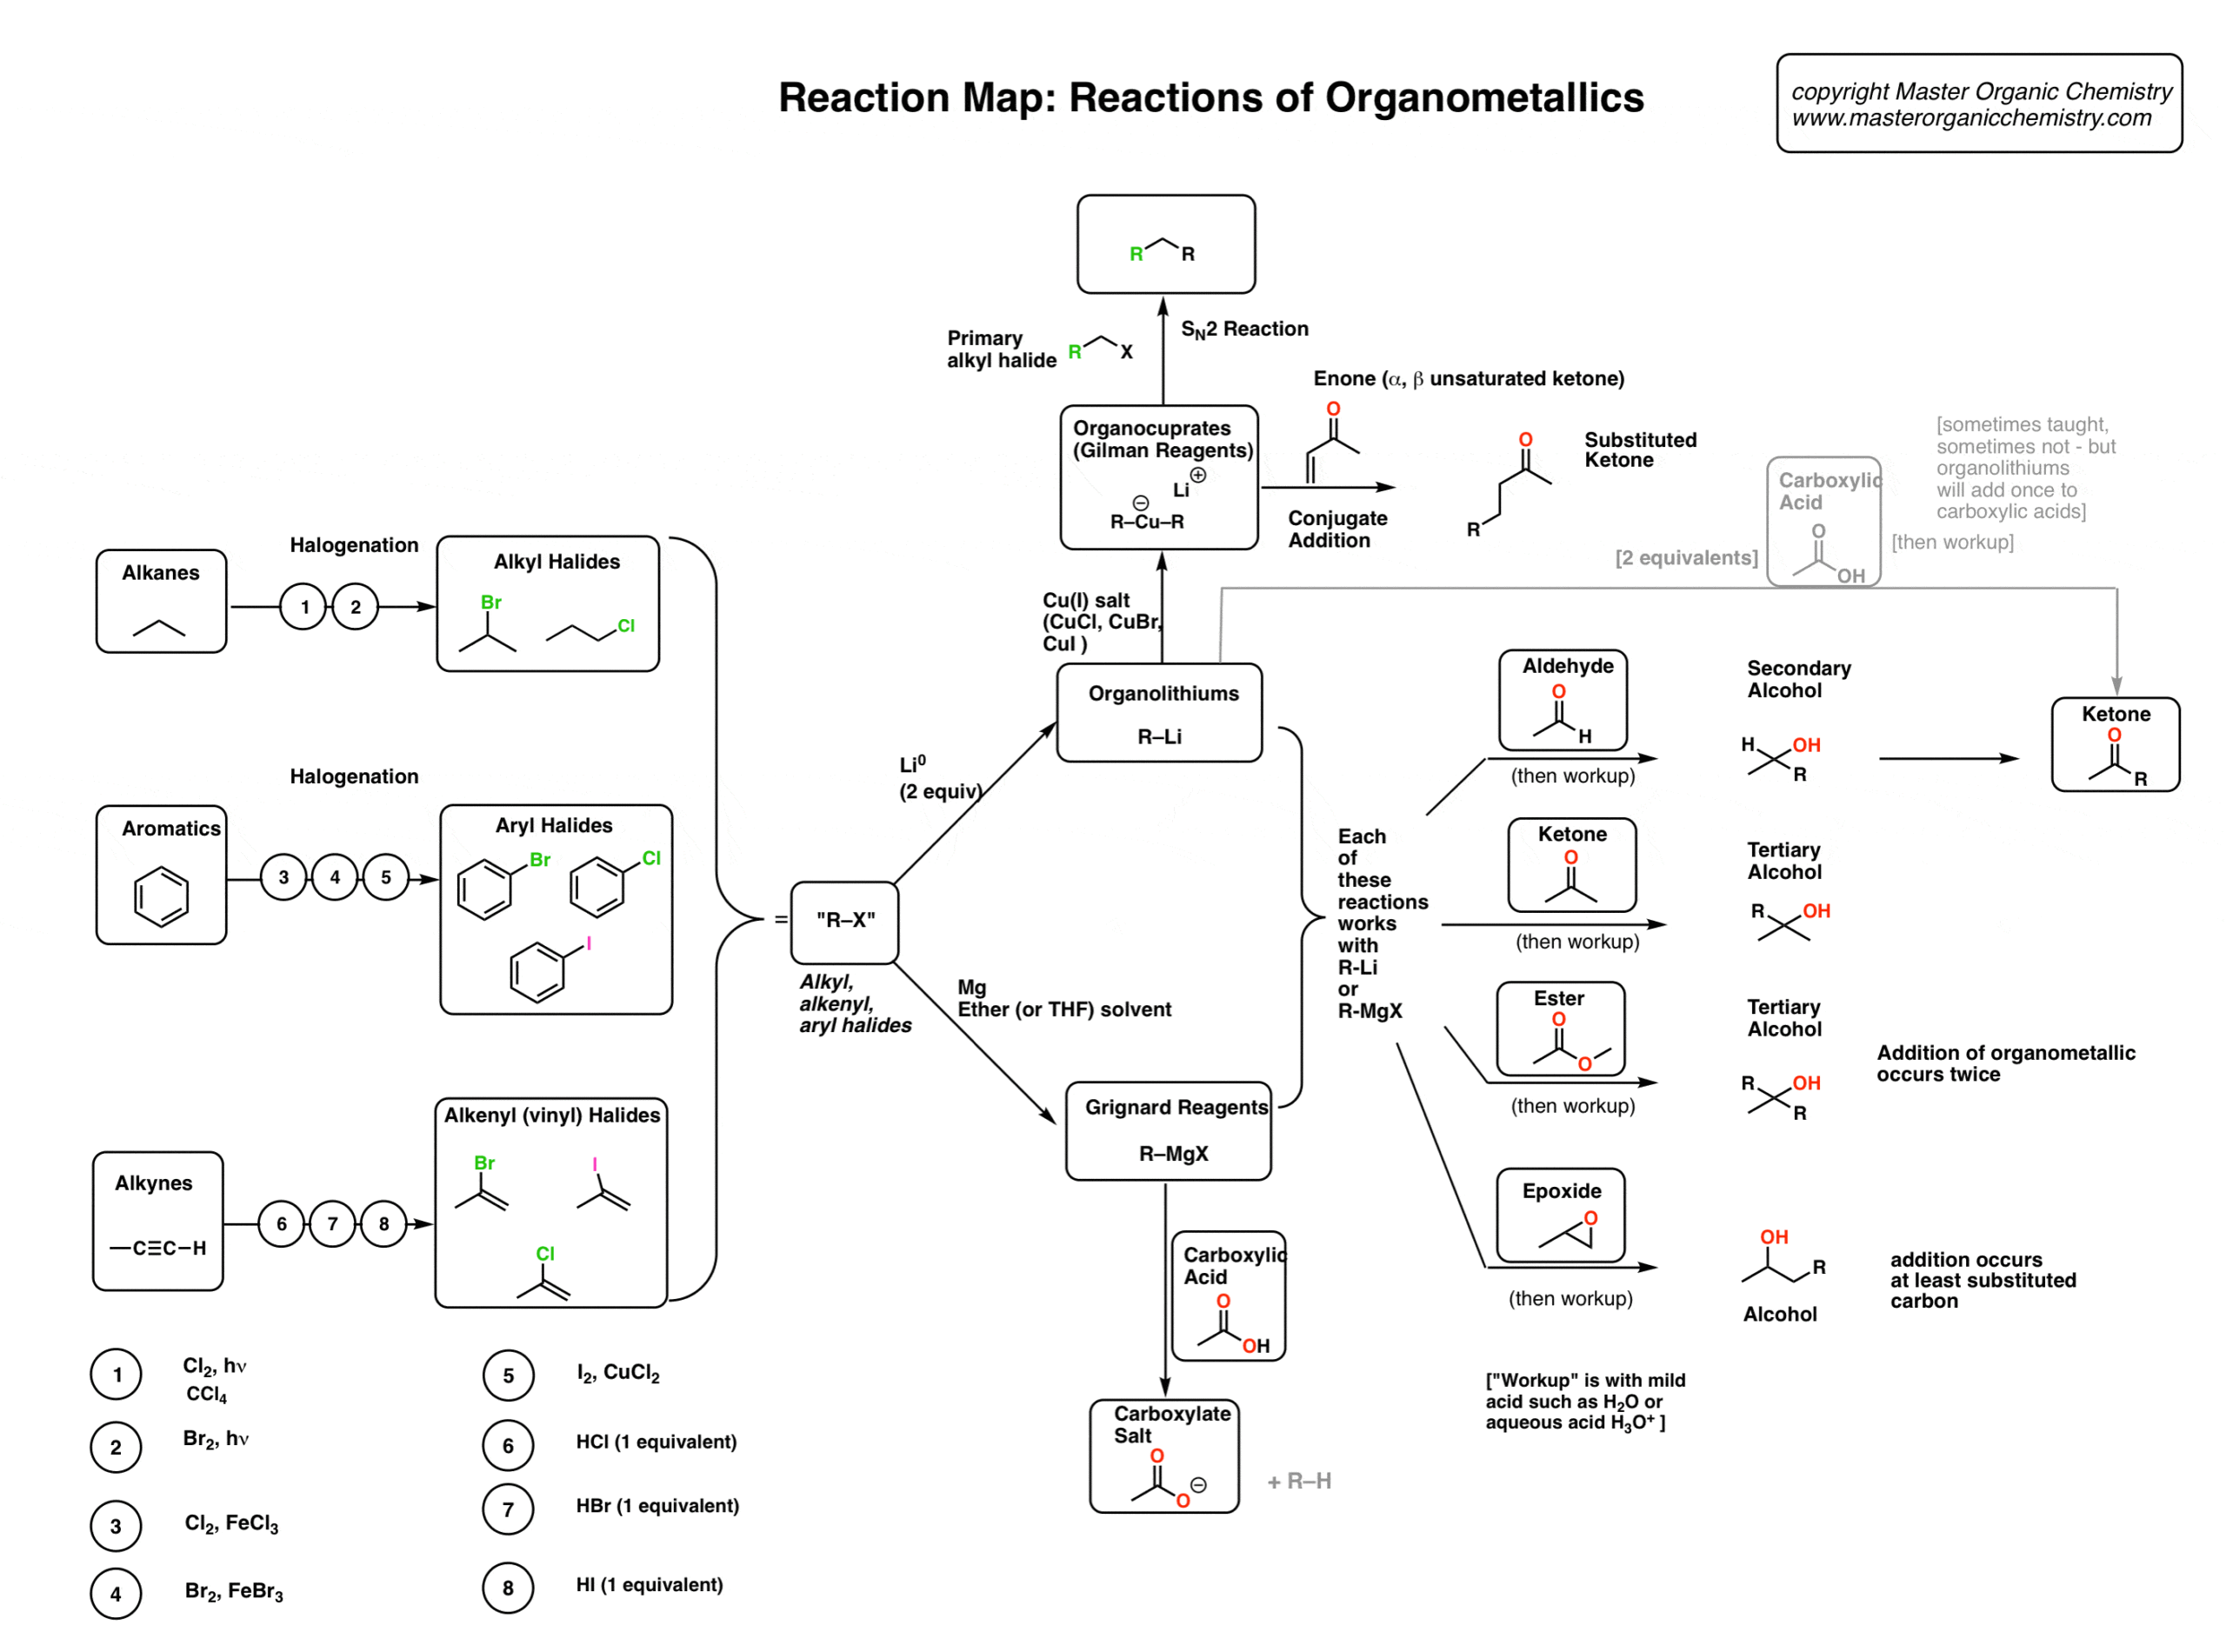 reaction-map-of-organometallic-compounds-including-reactions-of-alcohols-alkenes-alkynes-and-other-reagents-scaled